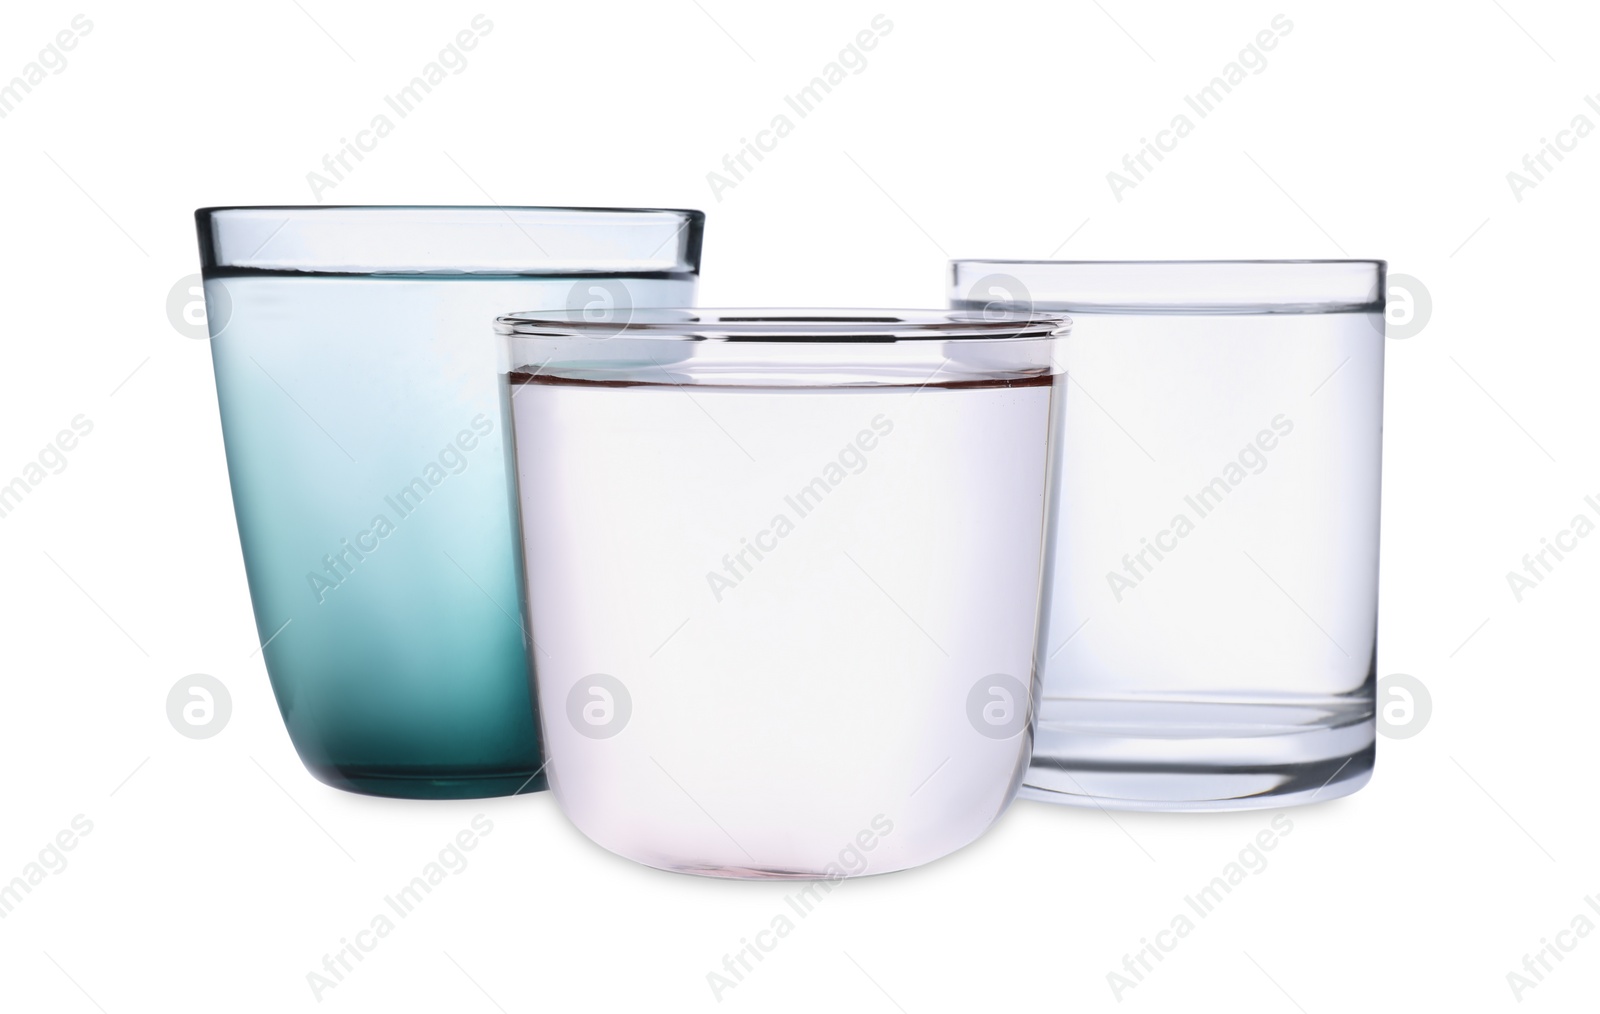 Photo of Different glasses of water on white background